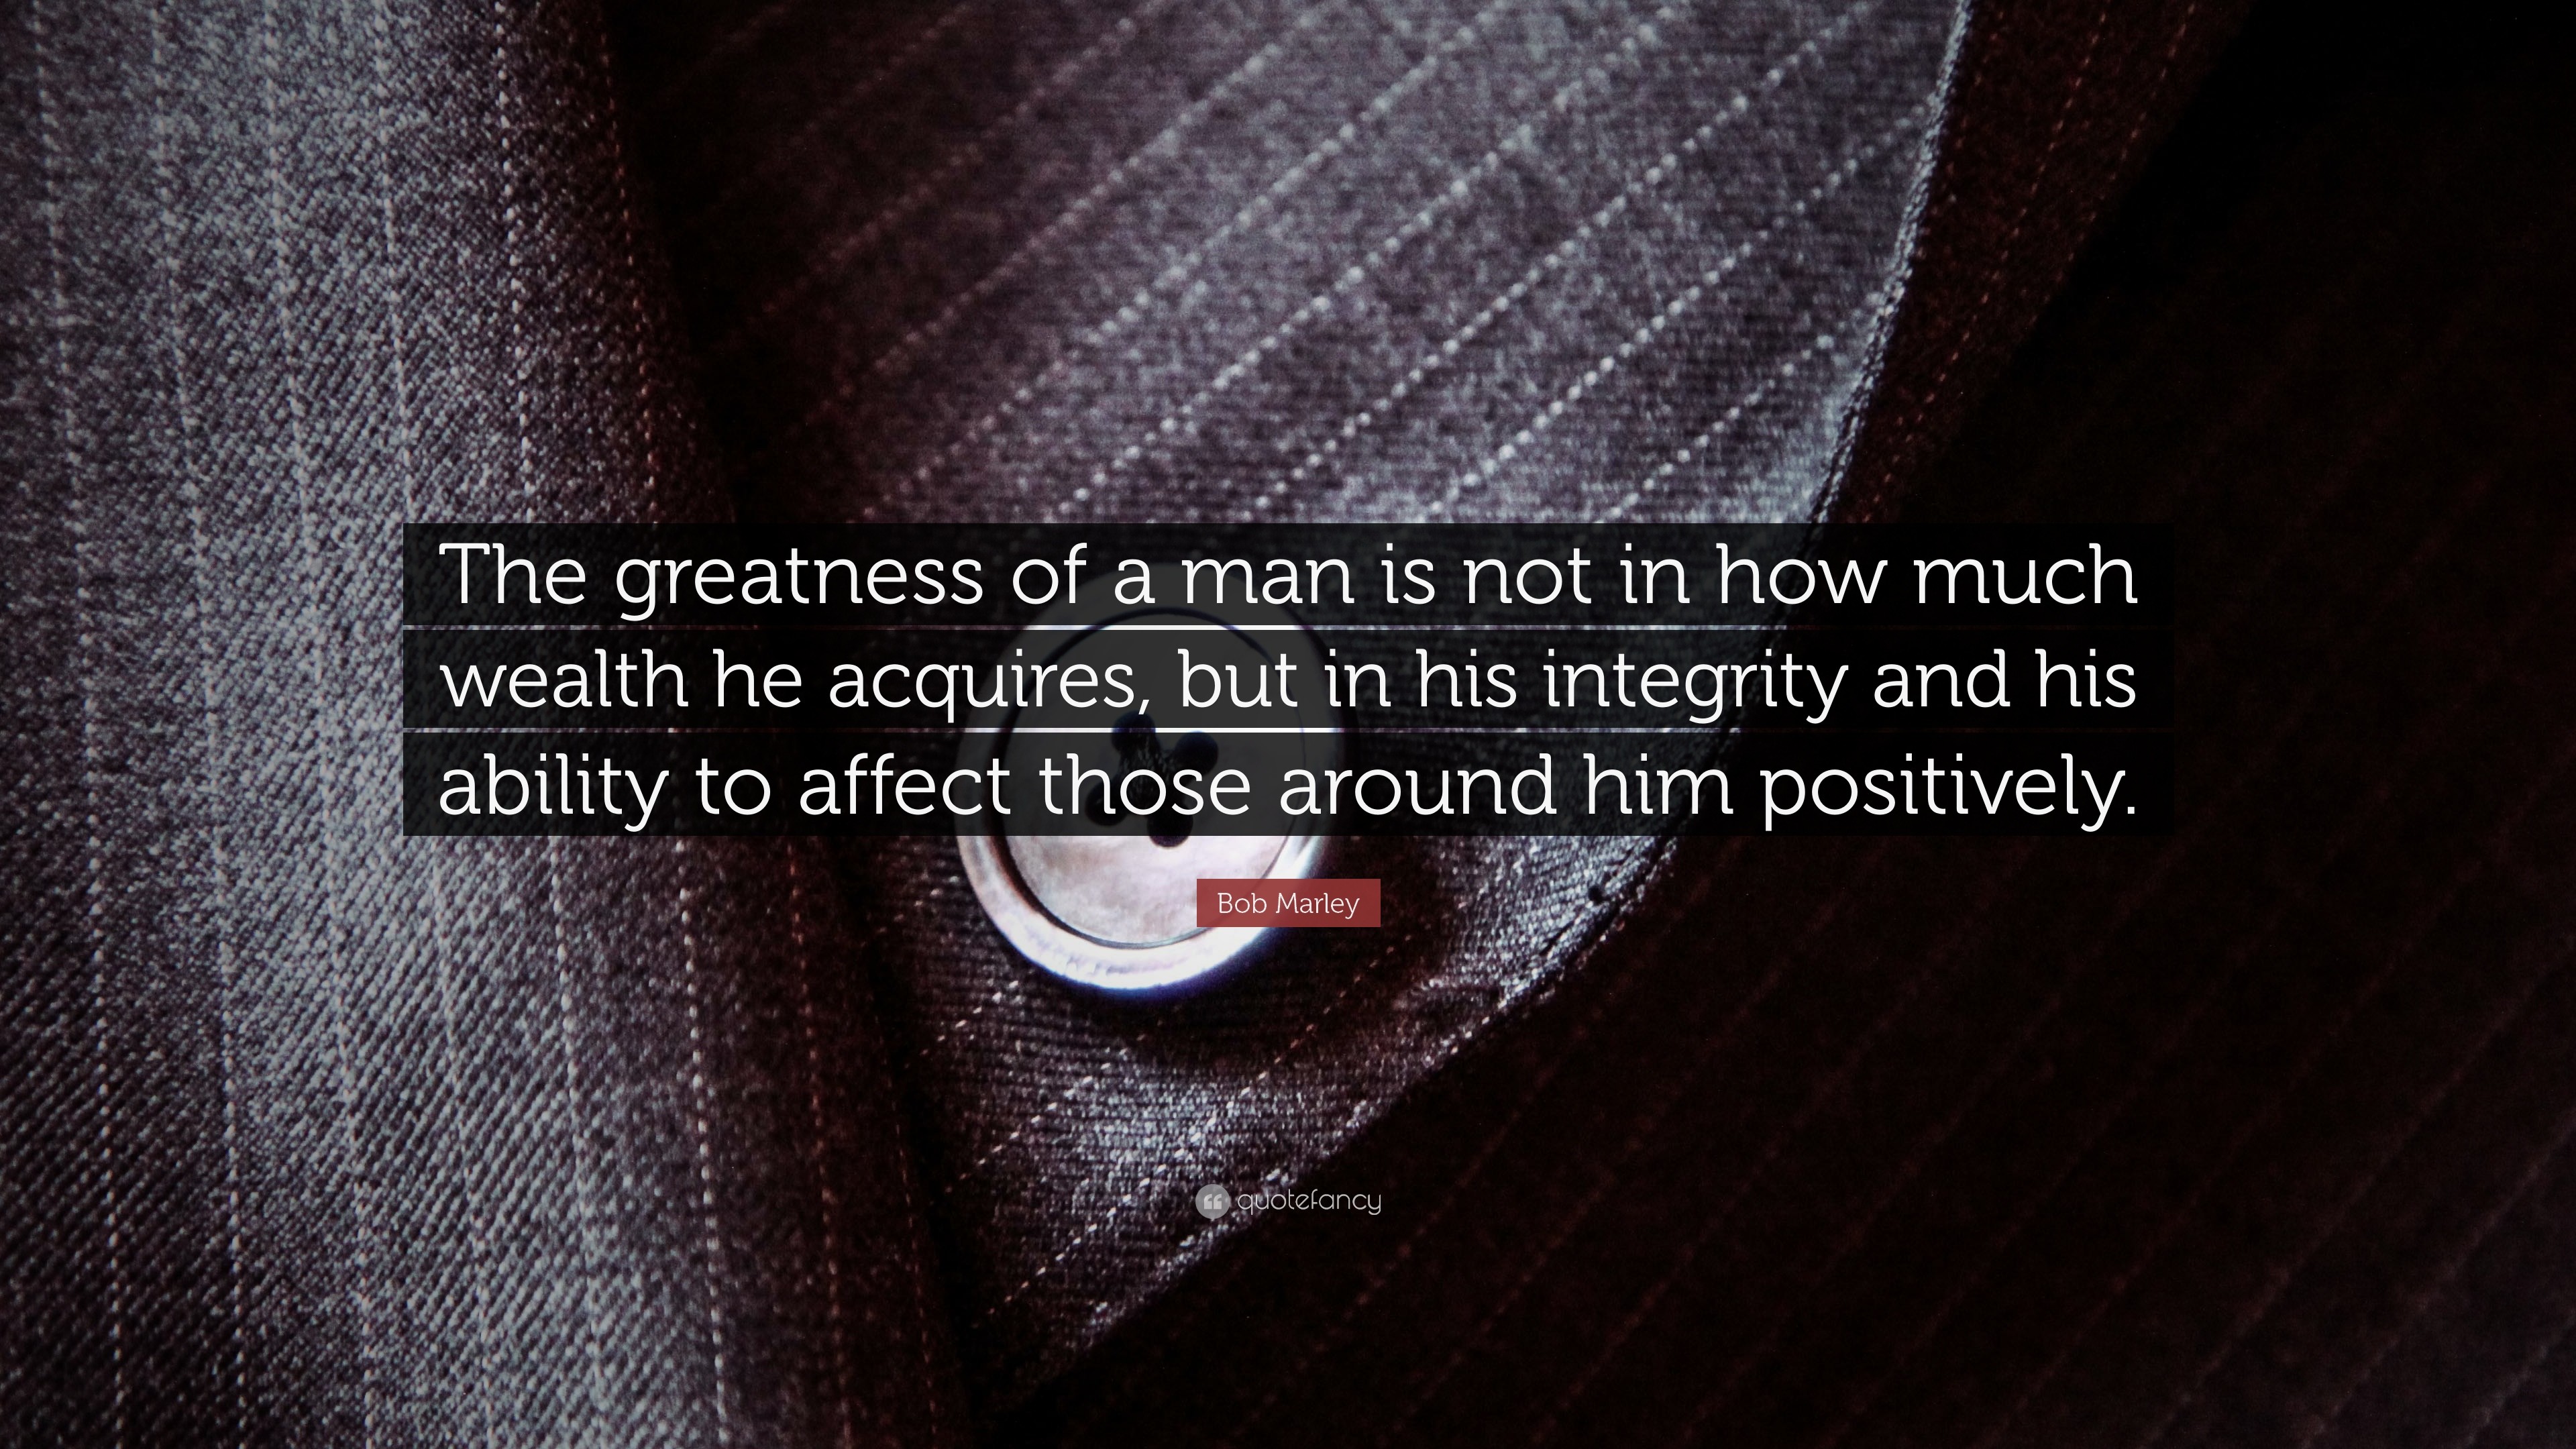 3840x2160 Bob Marley Quote: “The greatness of a man is not in how much wealth